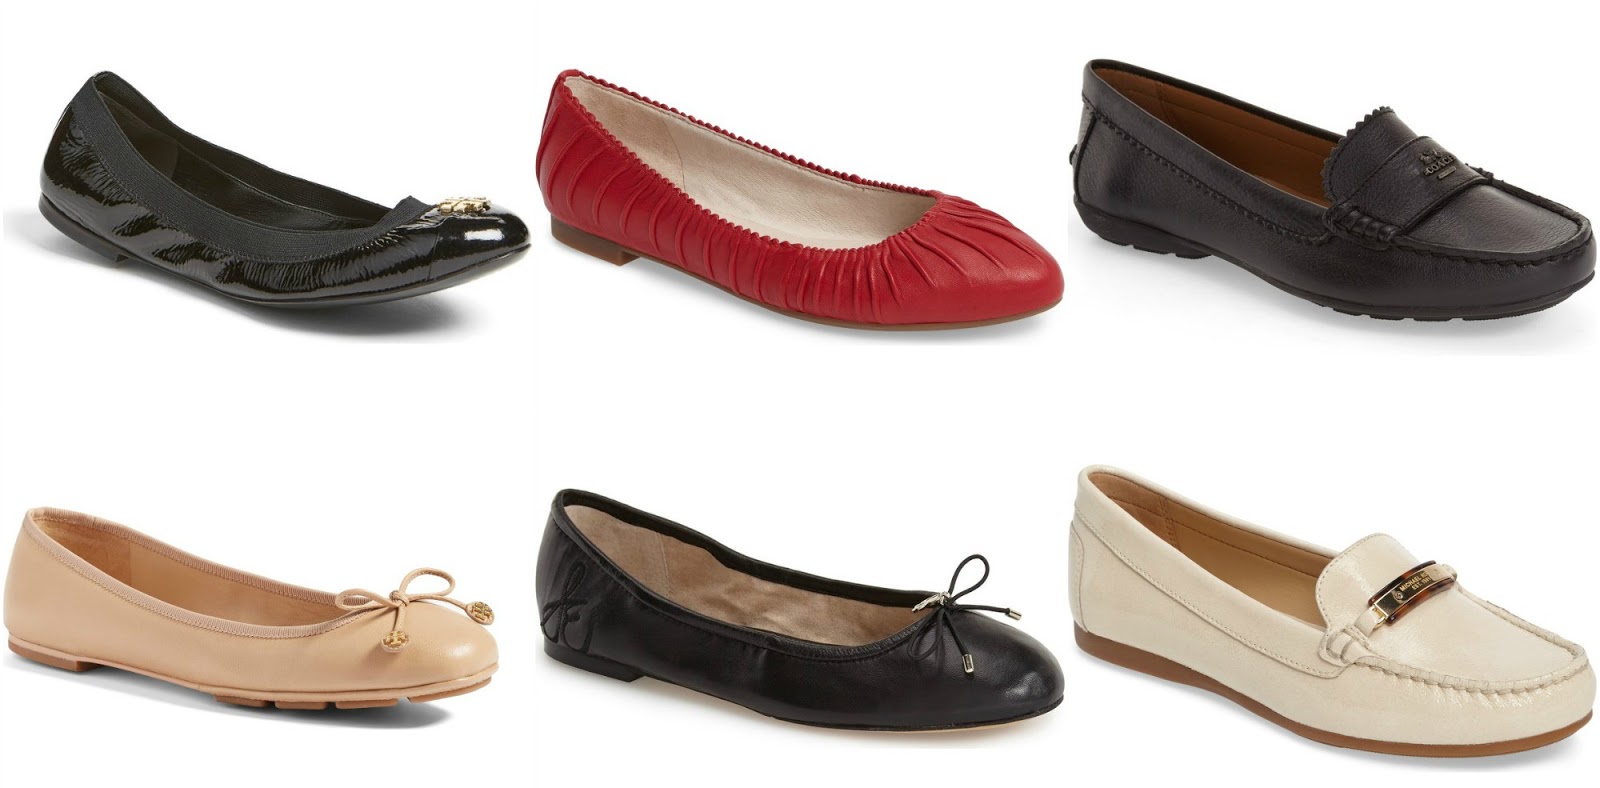 Franish: what shoes to wear on clinical rotations